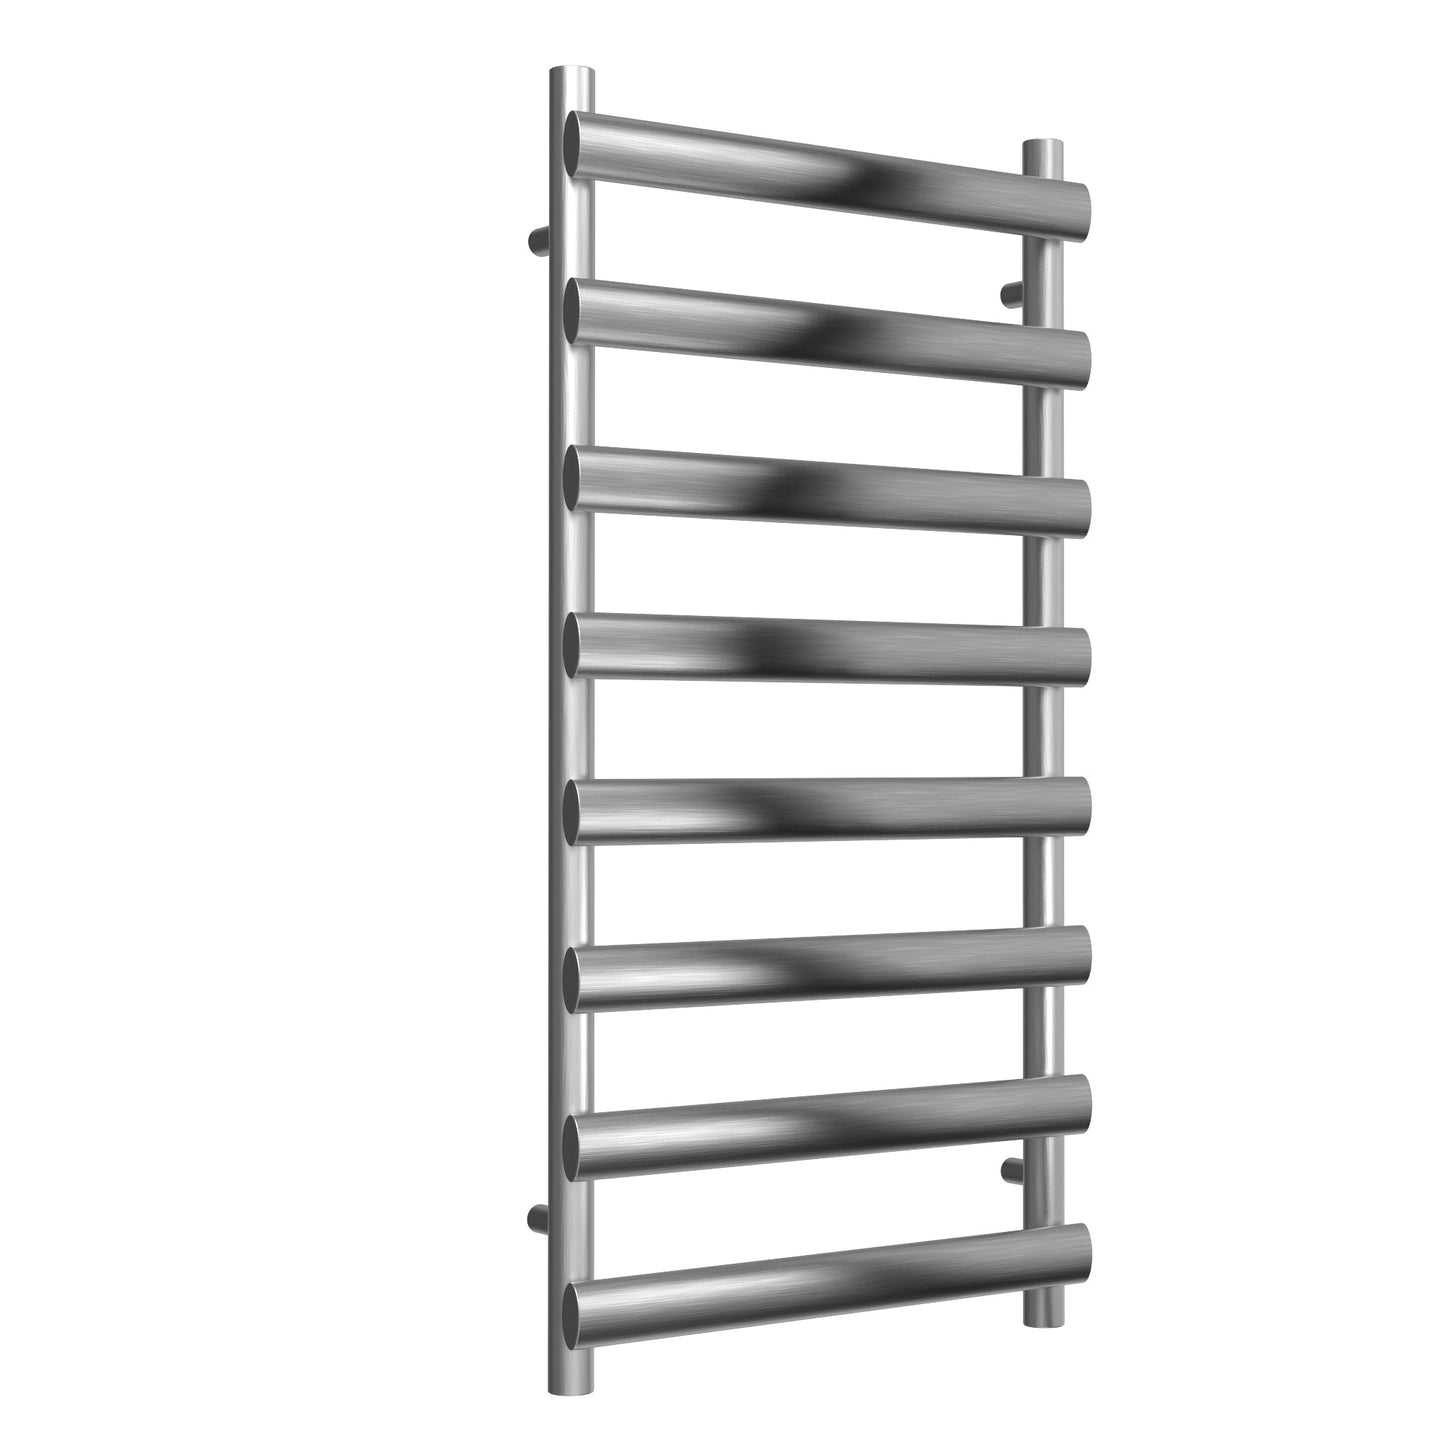 Deno Electric Stainless Steel Heated Towel Rail - Various Sizes - Satin Finish